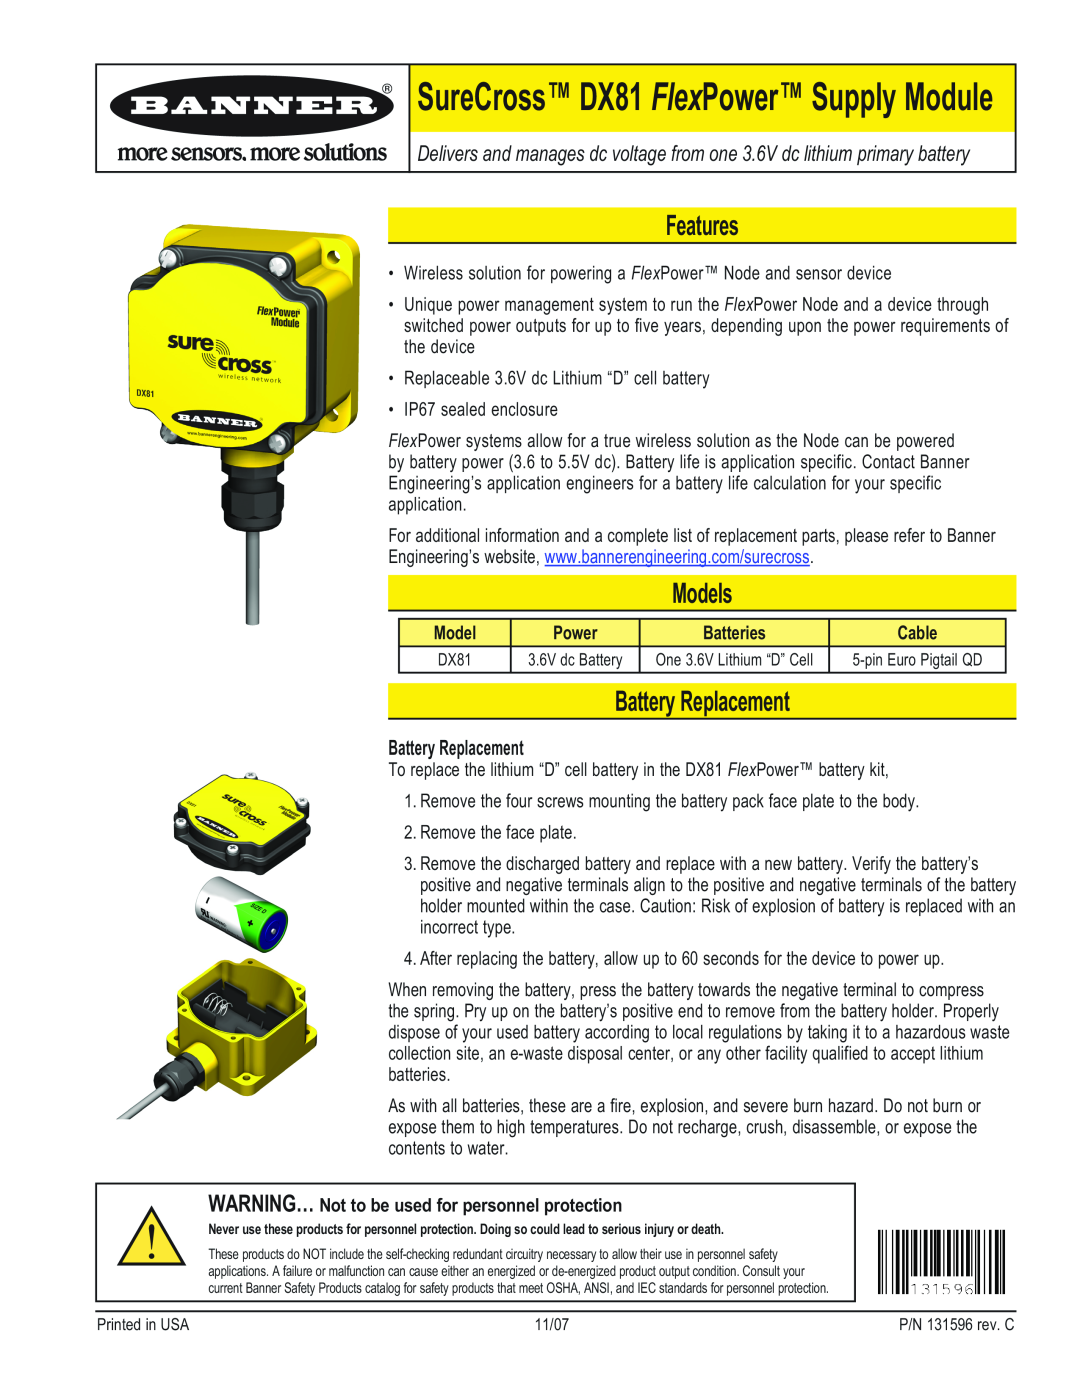 Banner manual Features, Models, Battery Replacement, Batteries, Cable, SureCross DX81 FlexPower Supply Module 